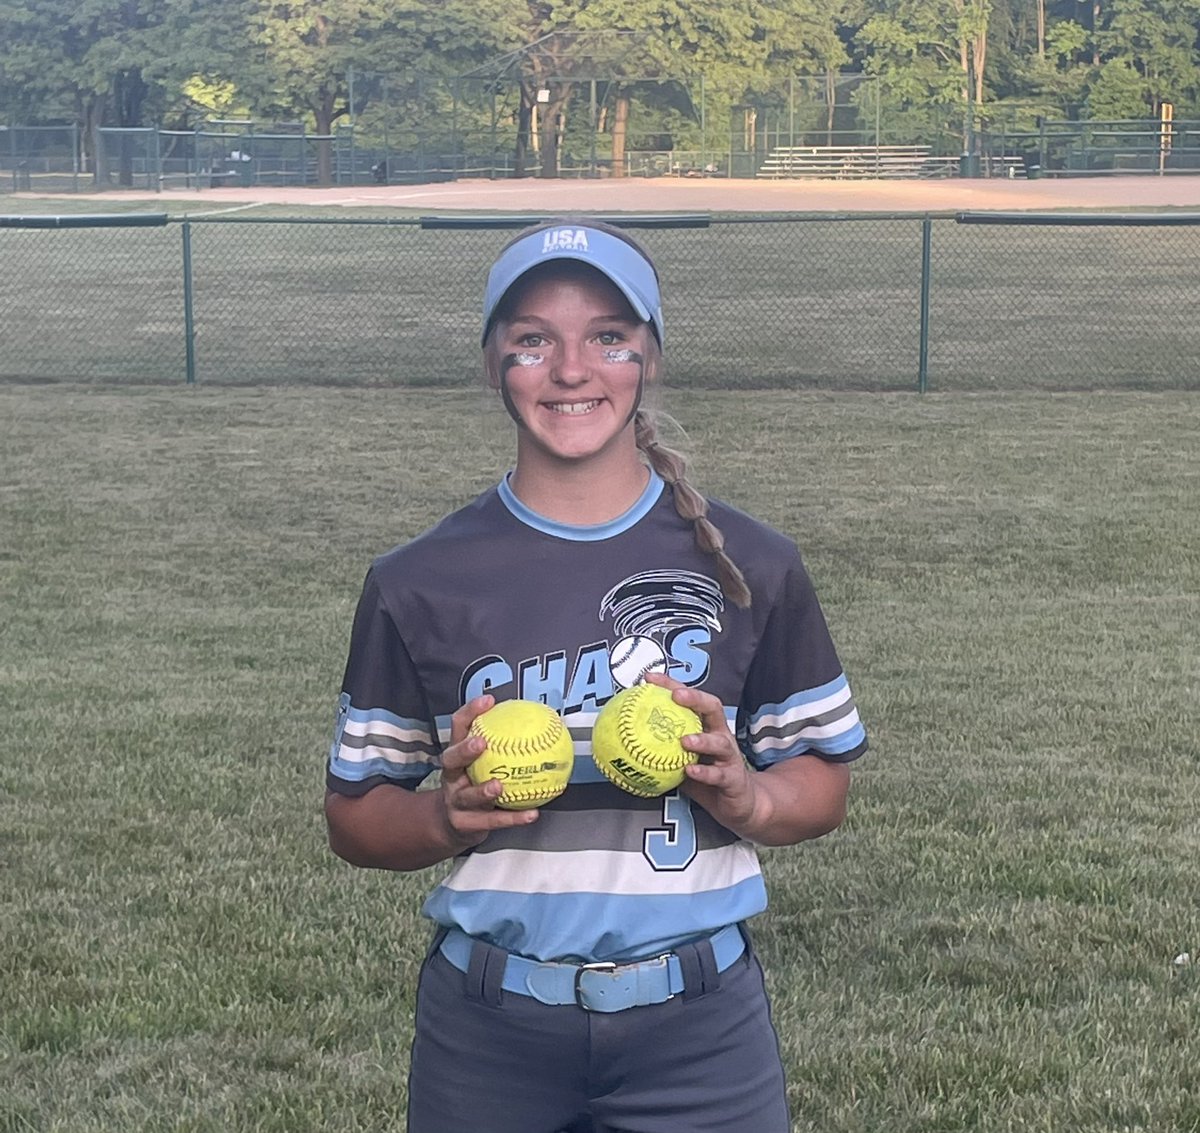 My team did great today! I had two 💣💣 and went 5-6 at the plate. My teammate @OliviaGeorge26 also hit a 💣! Let’s keep it going tmr #bombsquad @14uChaos @ExtraInningSB @LegacyLegendsS1 @IHartFastpitch @SBRRetweets @SoftballPros @TopPreps @SunilSunderRaj3 @CoastRecruits